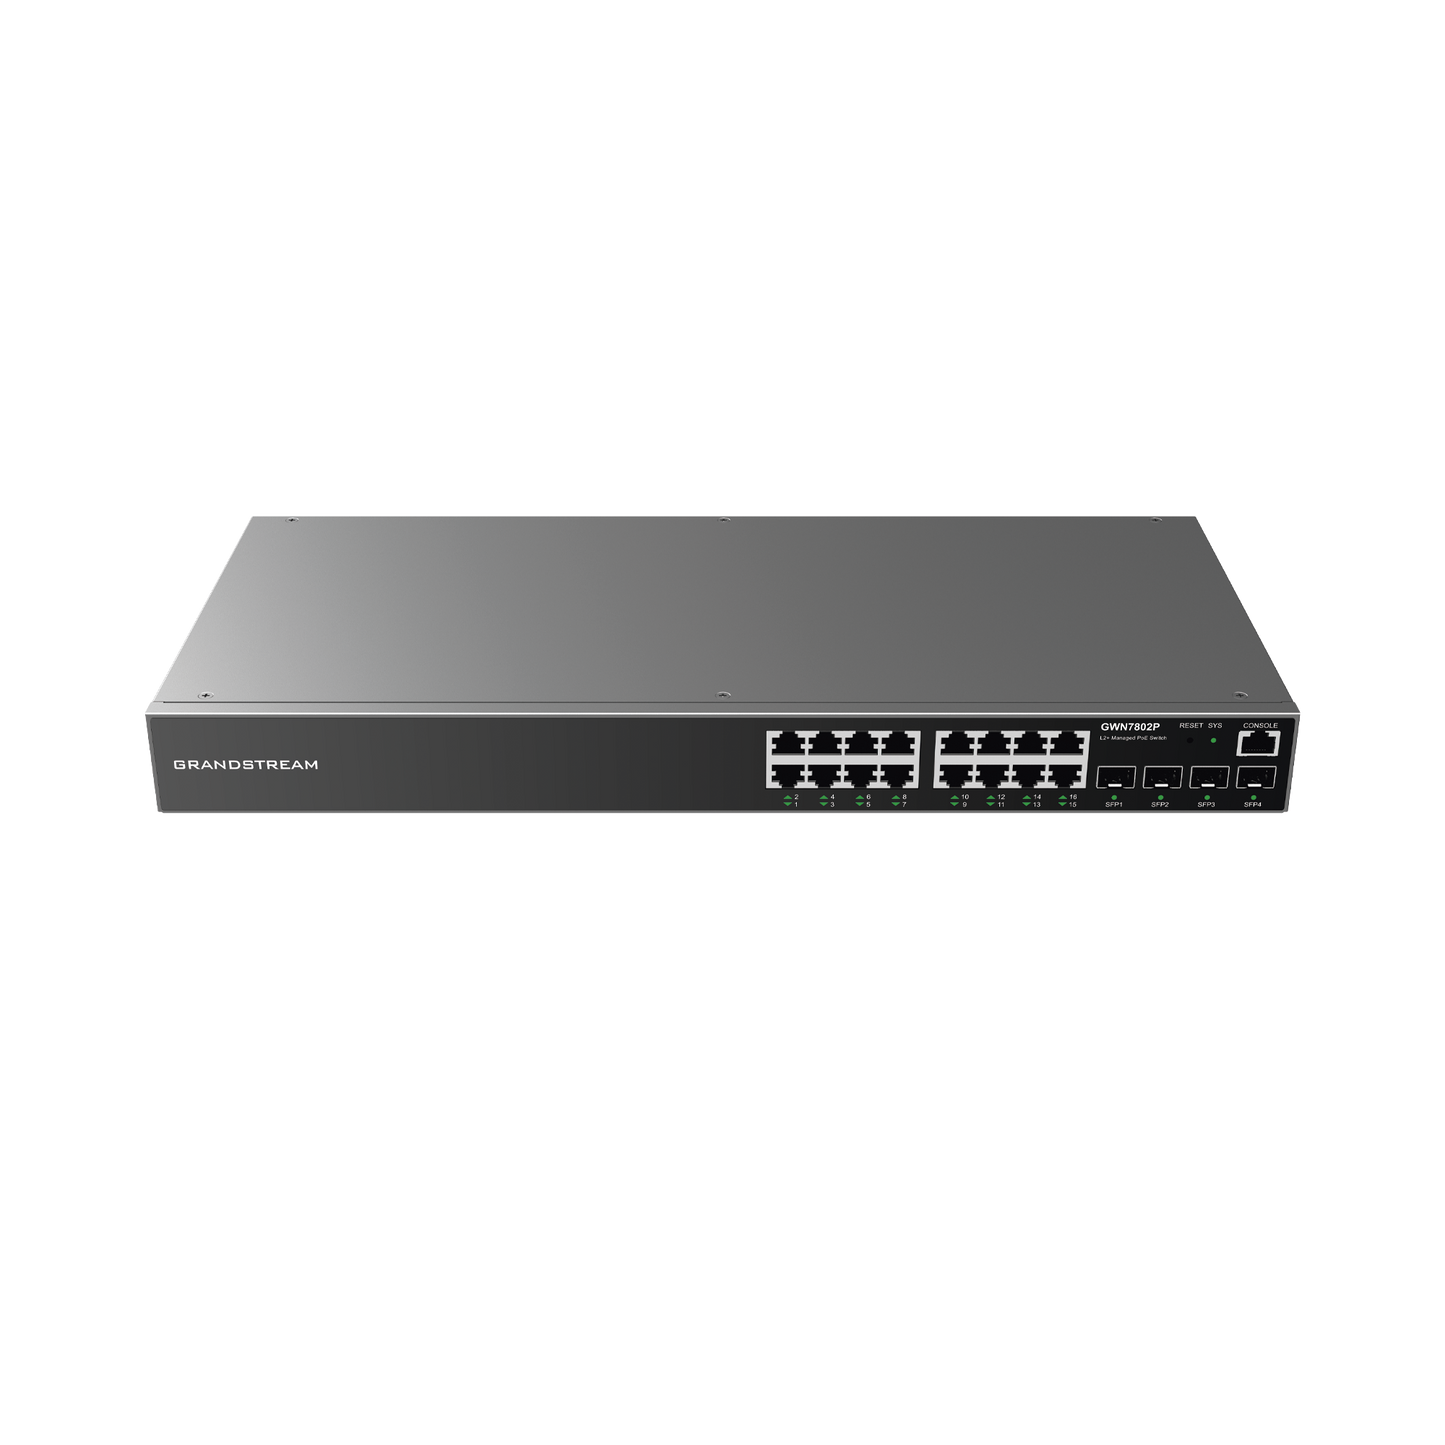 Managed Gigabit PoE+ Switch / 16 ports 10/100/1000 Mbps + 2 SFP Uplink Ports / Up to 240W / Compatible with GWN Cloud.